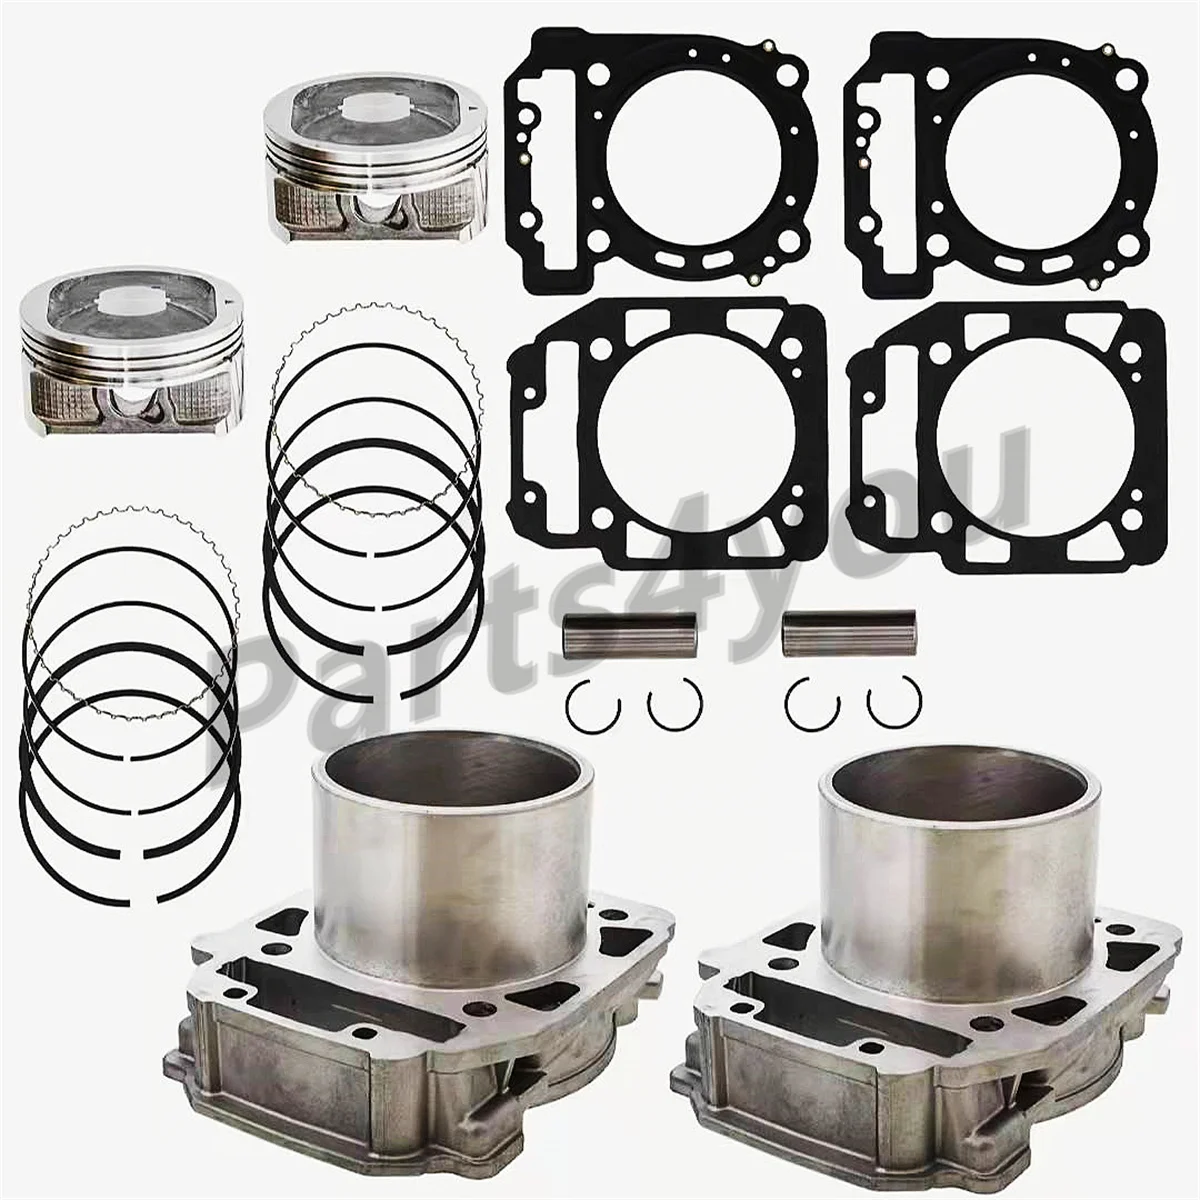 

Cylinder Piston Kit for BRP Can-Am Bombardier Commander Defender Outlander Renegade Max 400 650 800 800R HD8 1000 1000R HD10